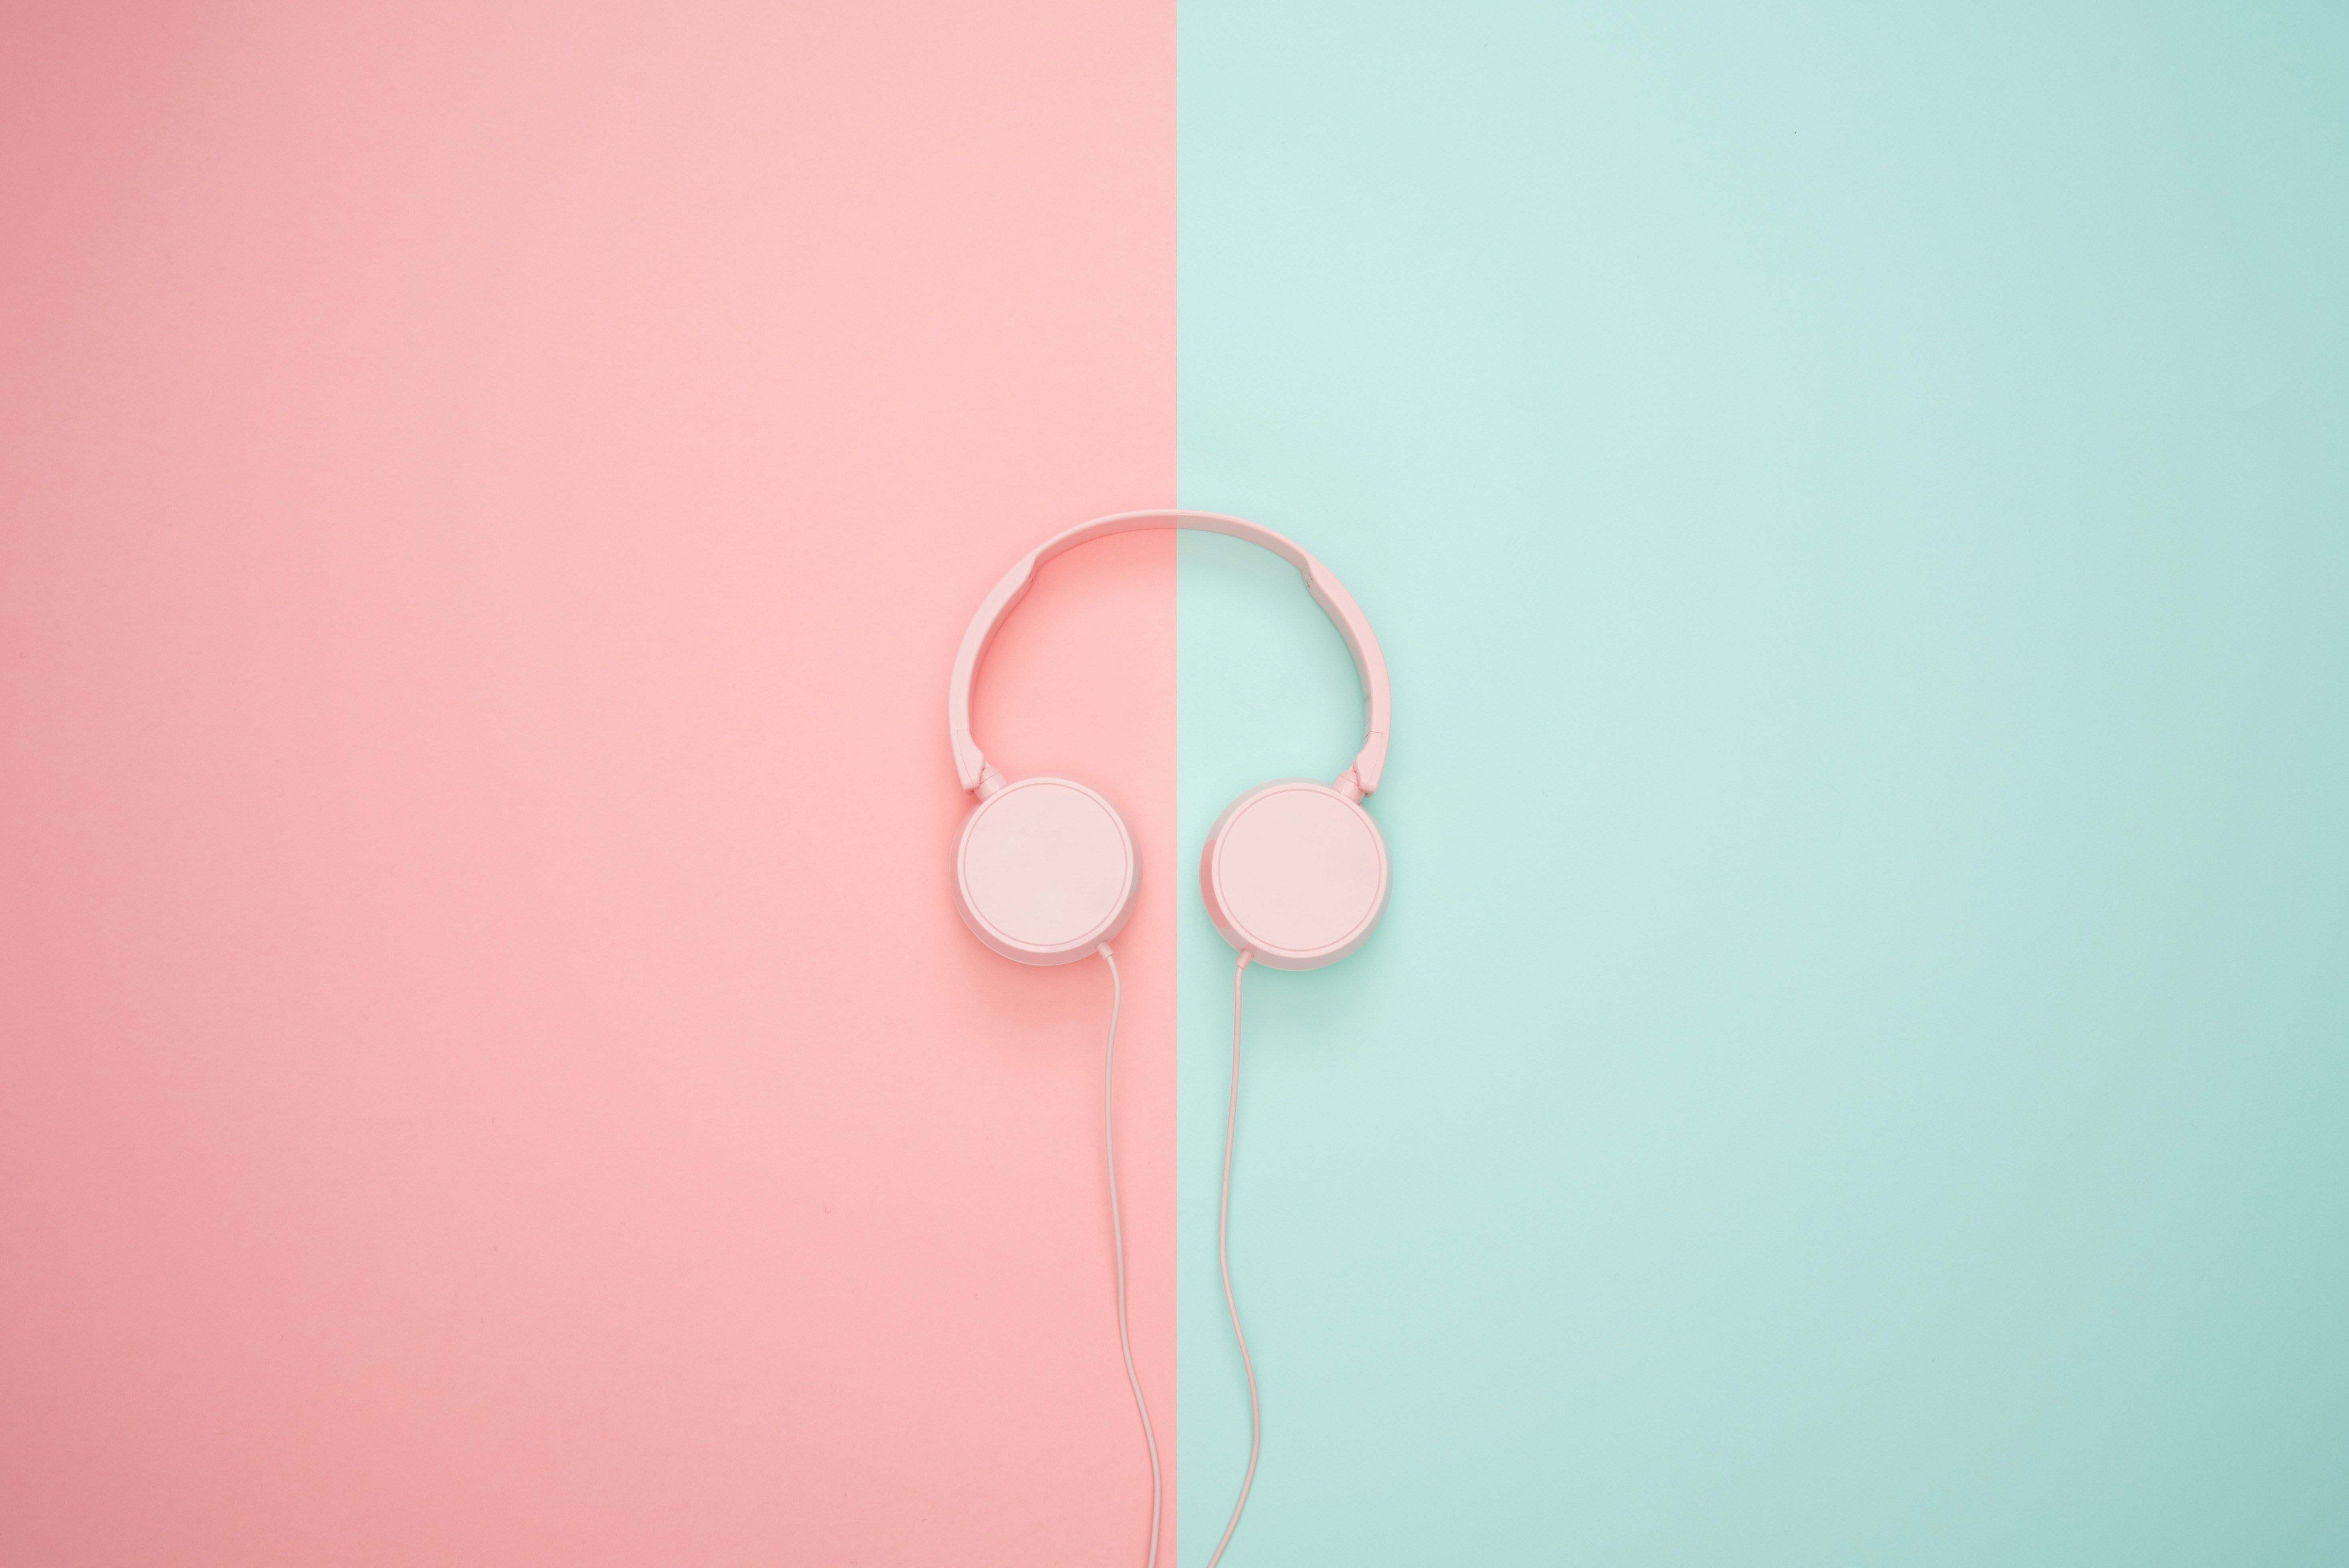 A pair of headphones on top and bottom - Pastel minimalist, cute pink, colorful, cute, laptop, cool, vintage, couple, simple, YouTube, music, pastel pink